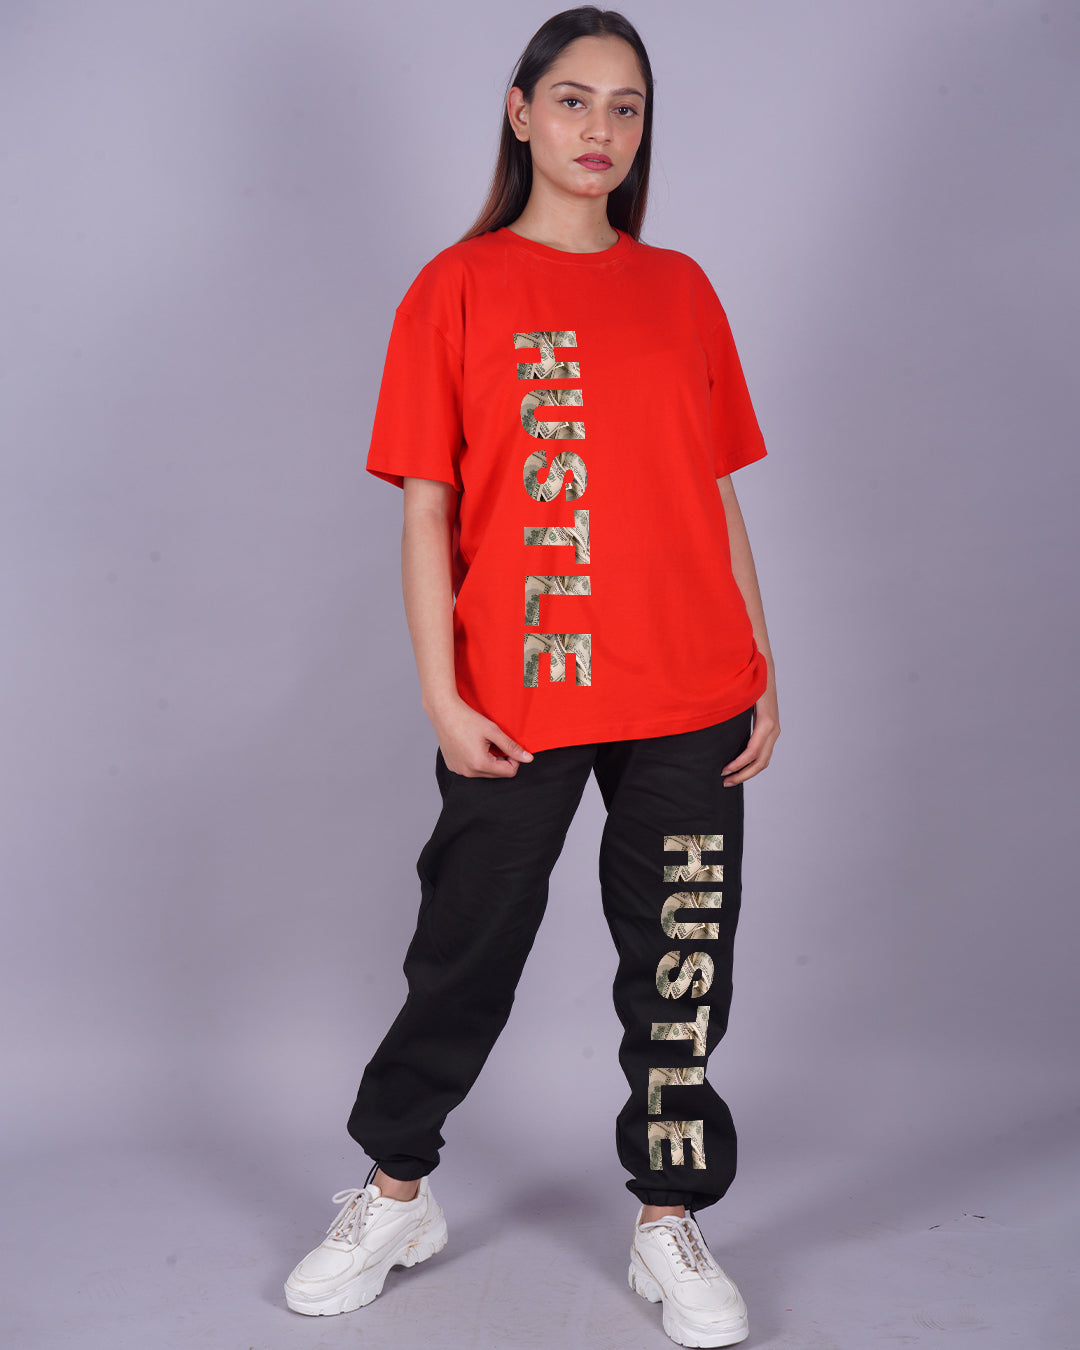 Women Hustle Oversized Co-Ord Set - Red and Black